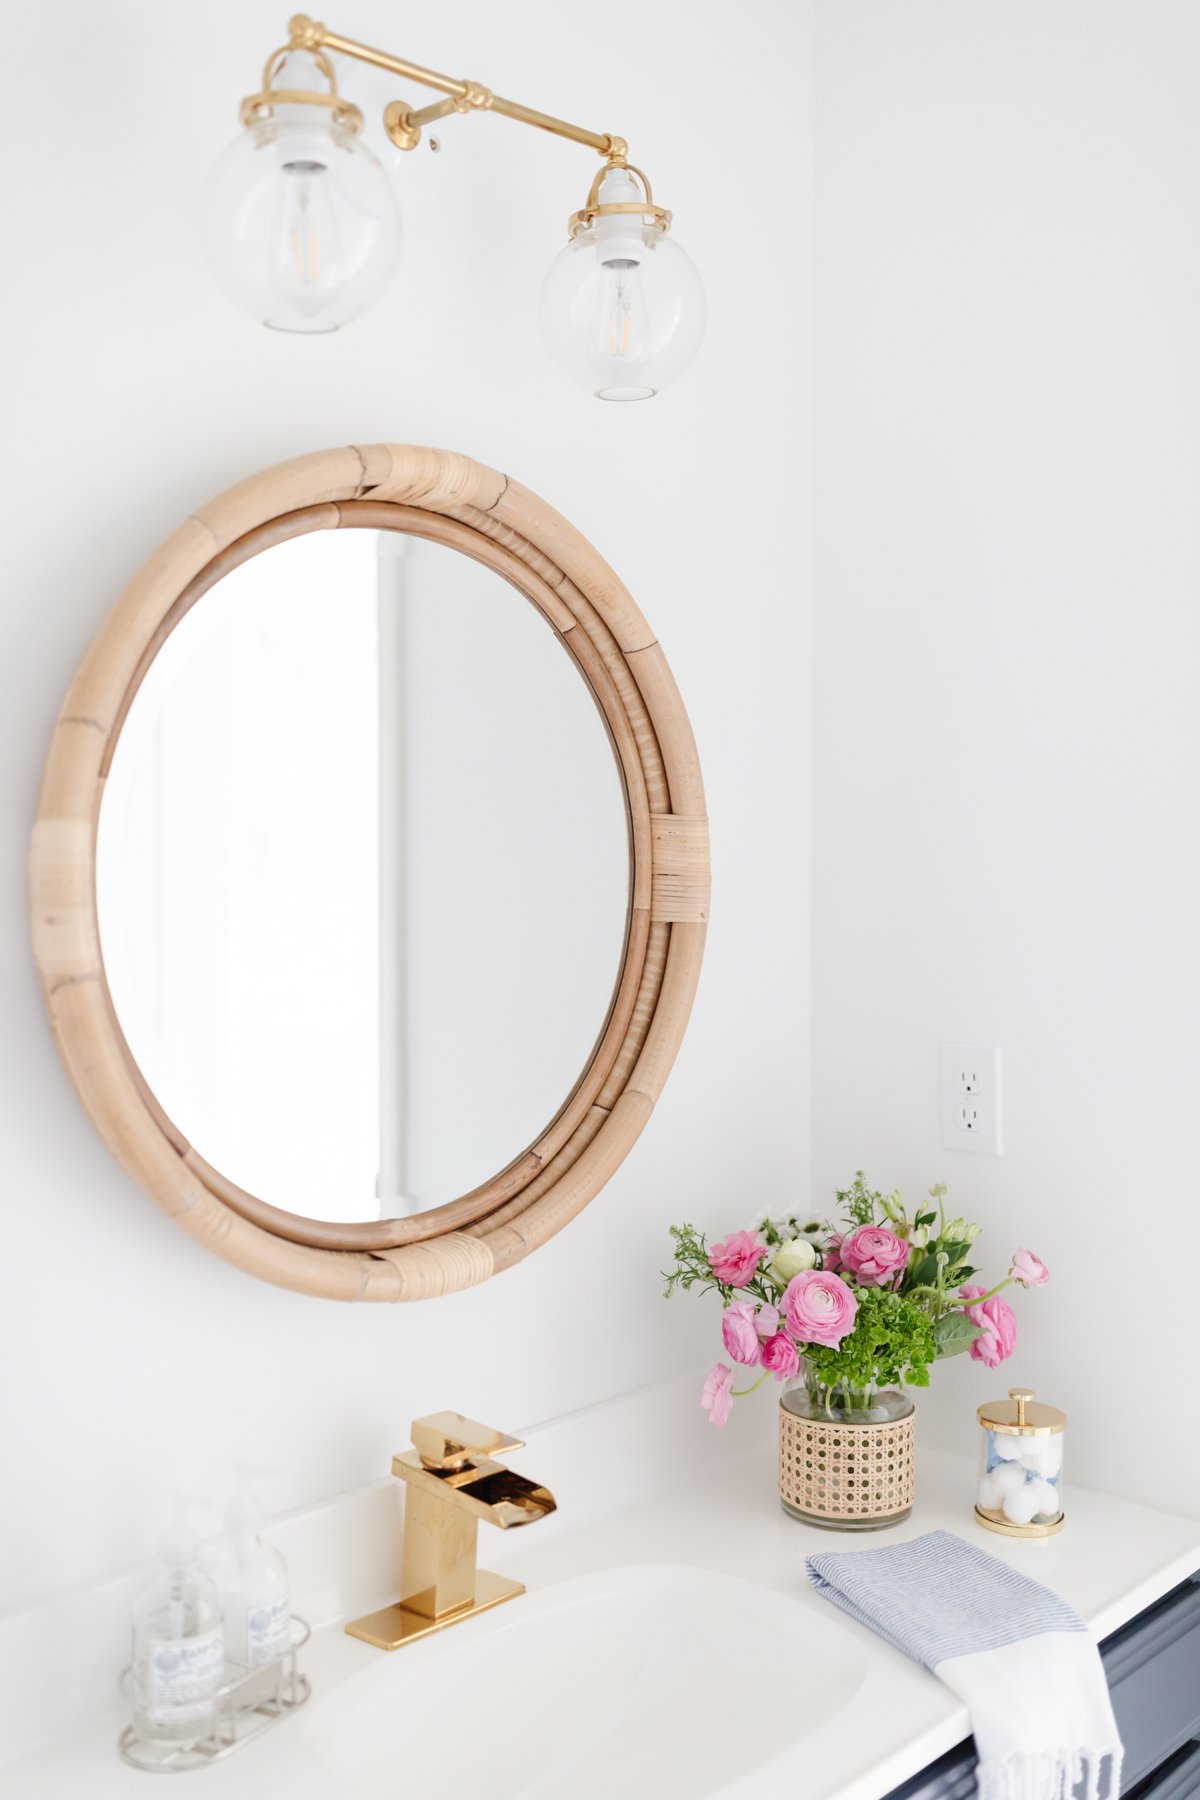 a bathroom with a round mirror, brass bathroom faucets and flowers.